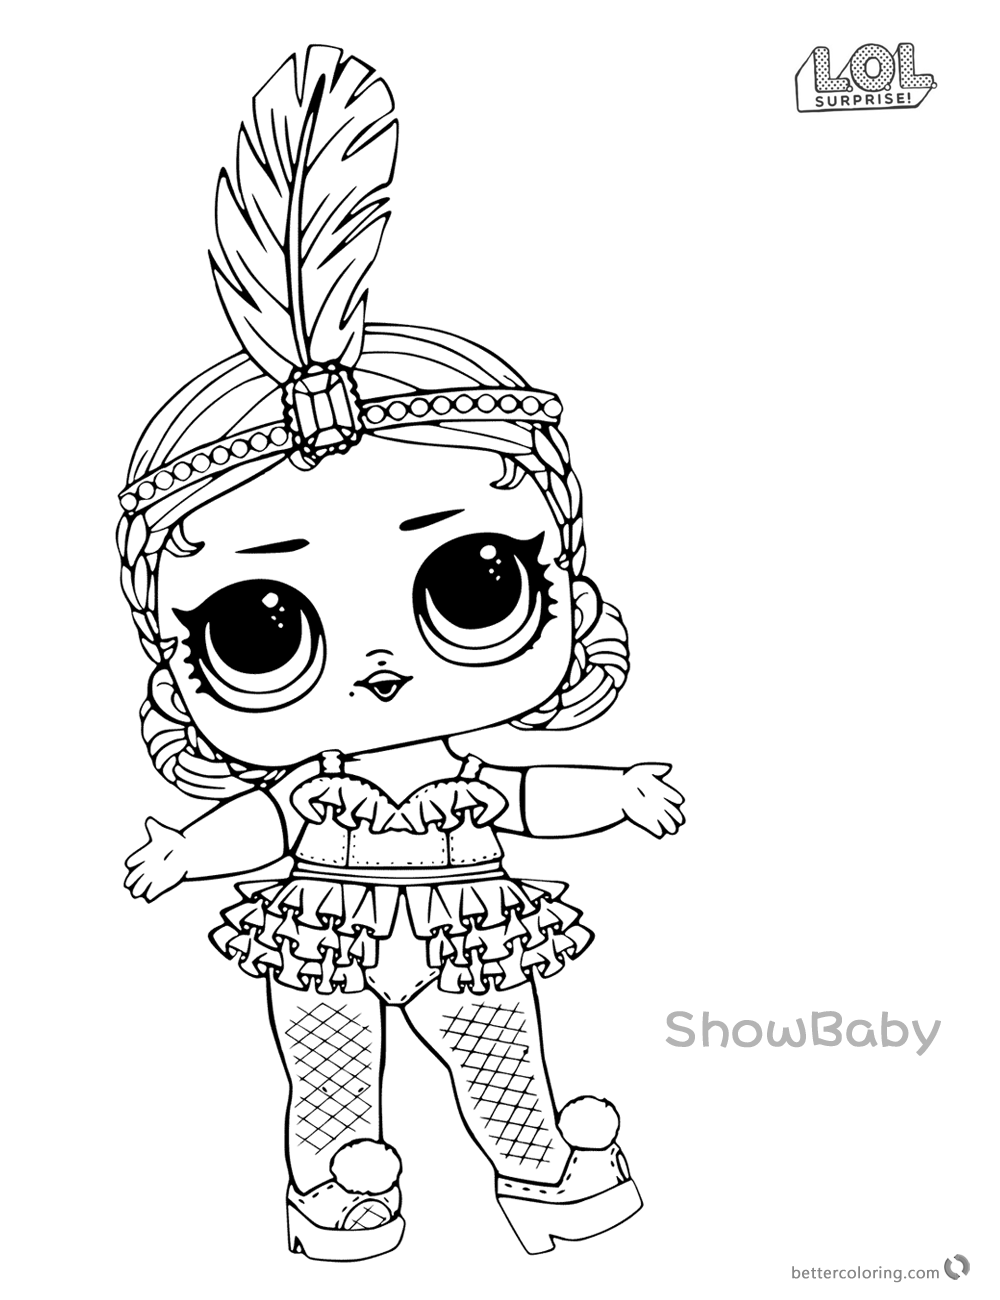 Lol Dolls Coloring Pages at GetColorings.com | Free printable colorings pages to print and color